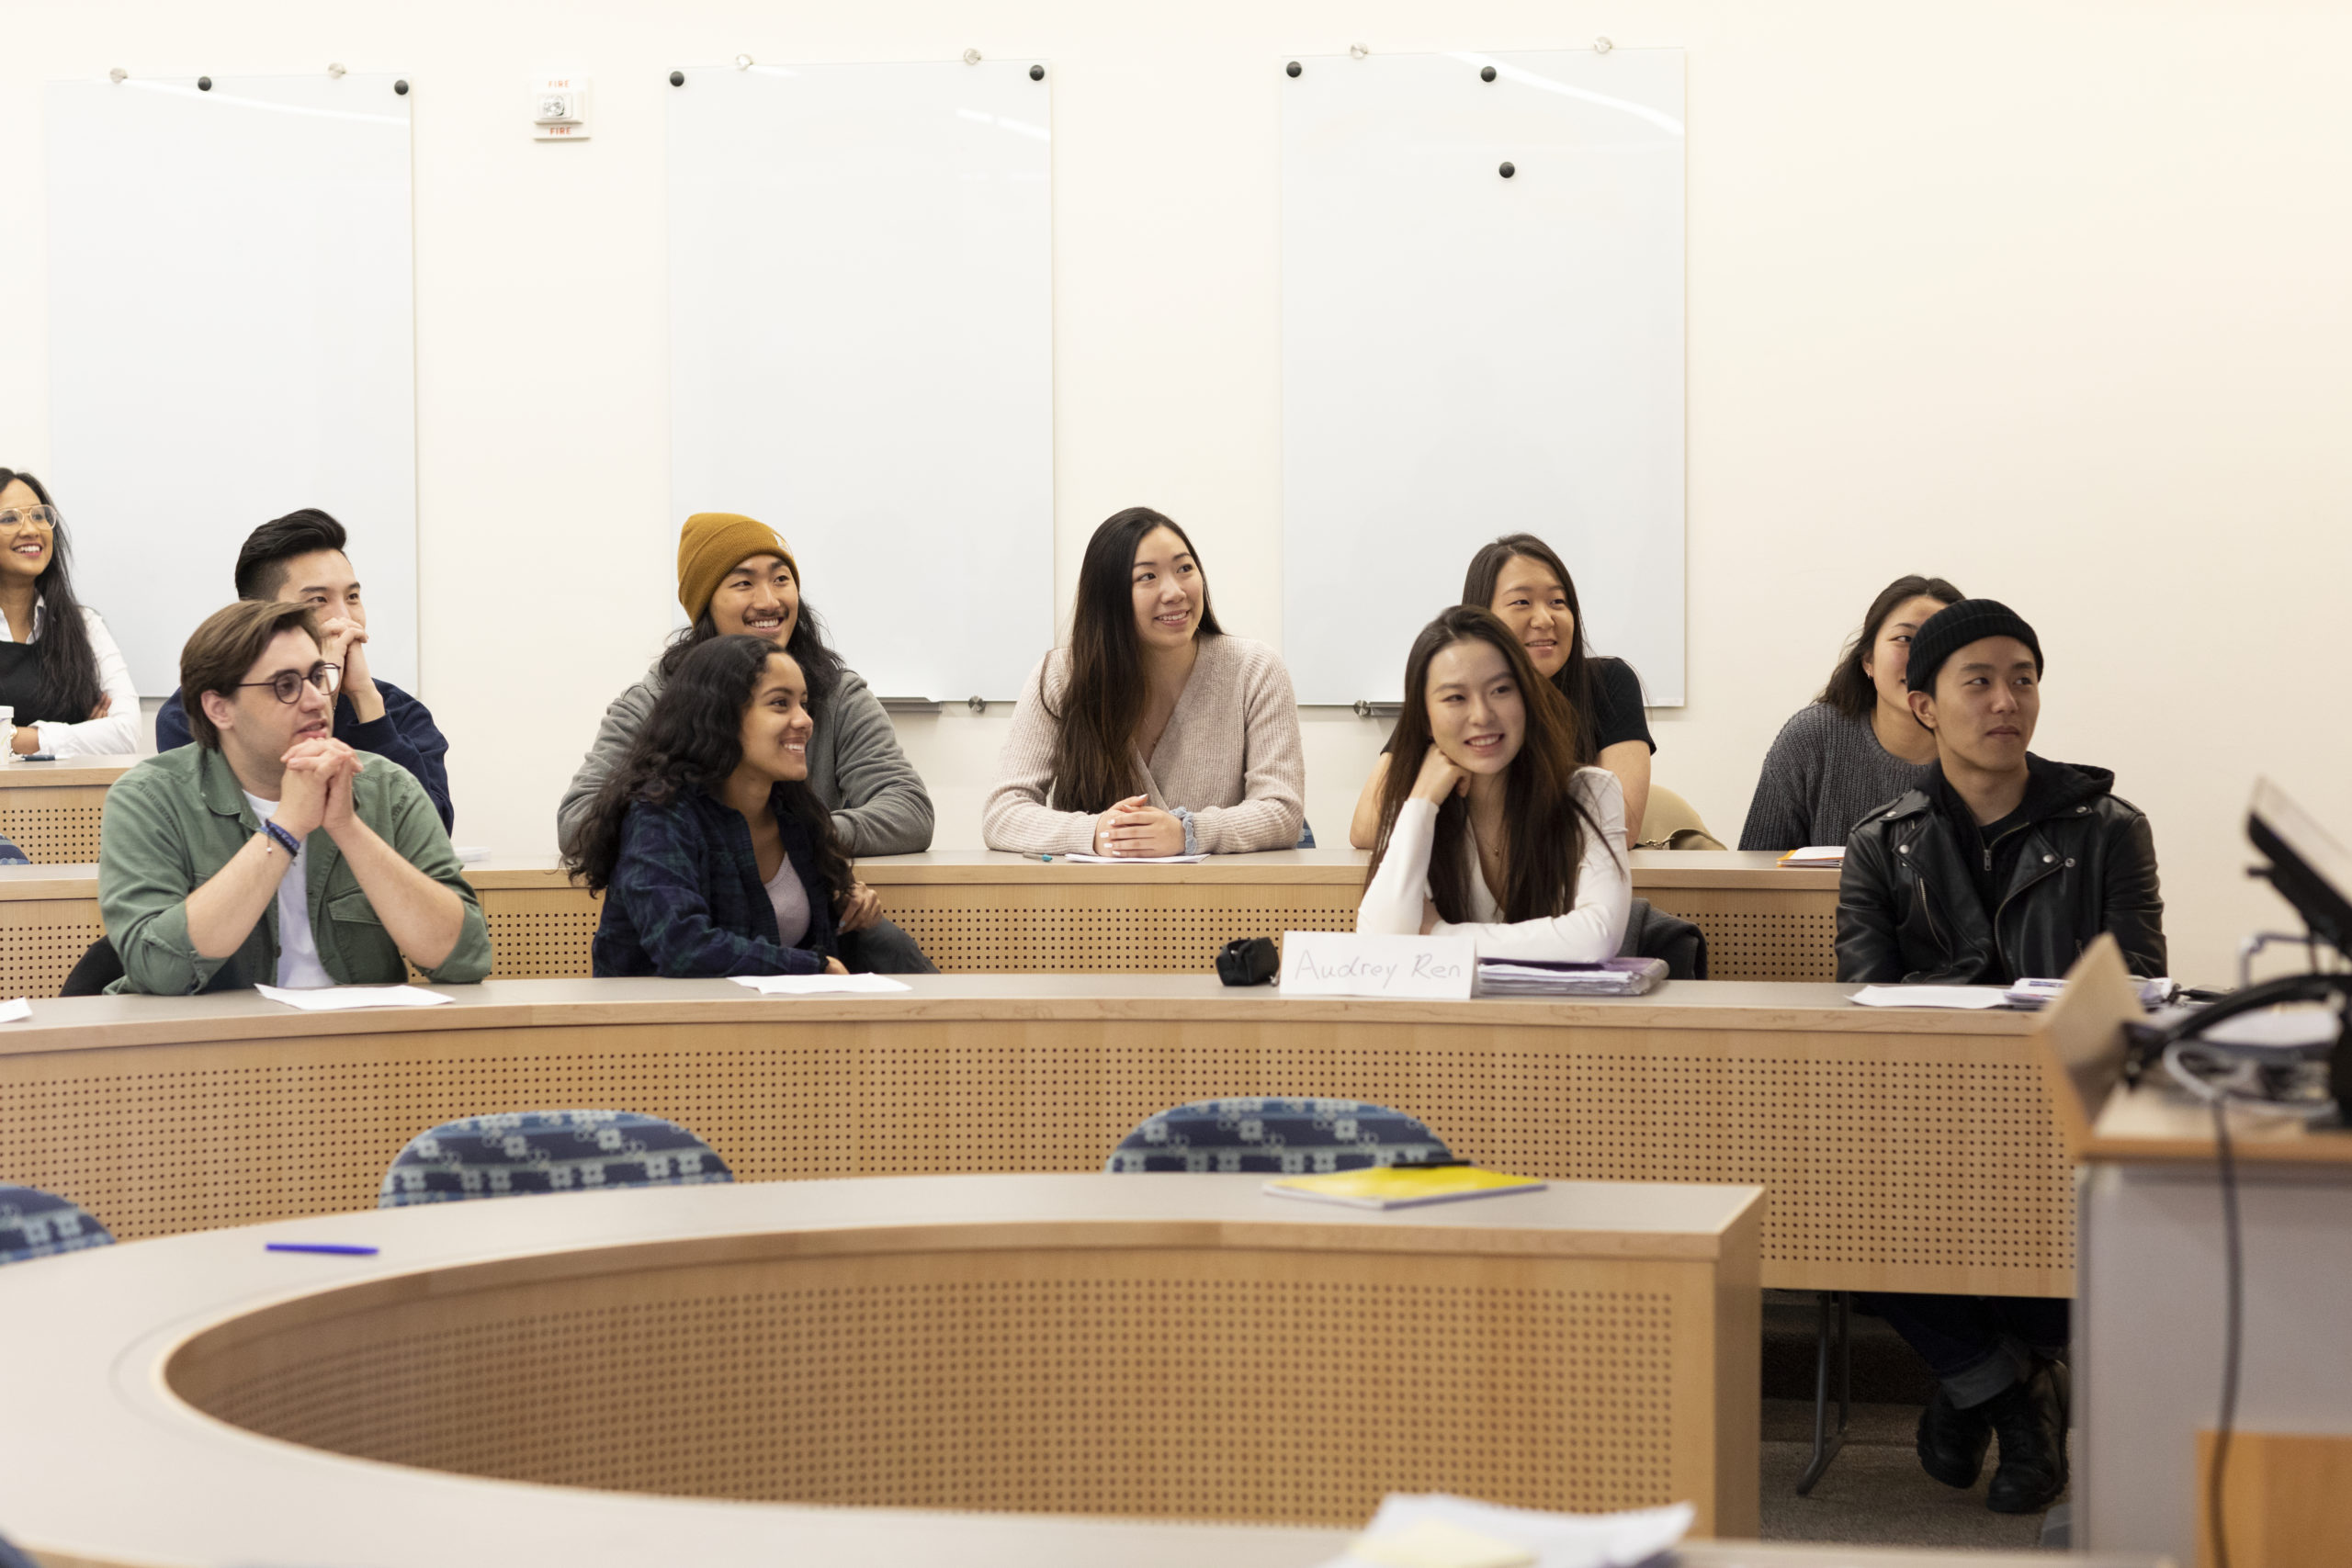 A group of students sitting in a lecture hall.